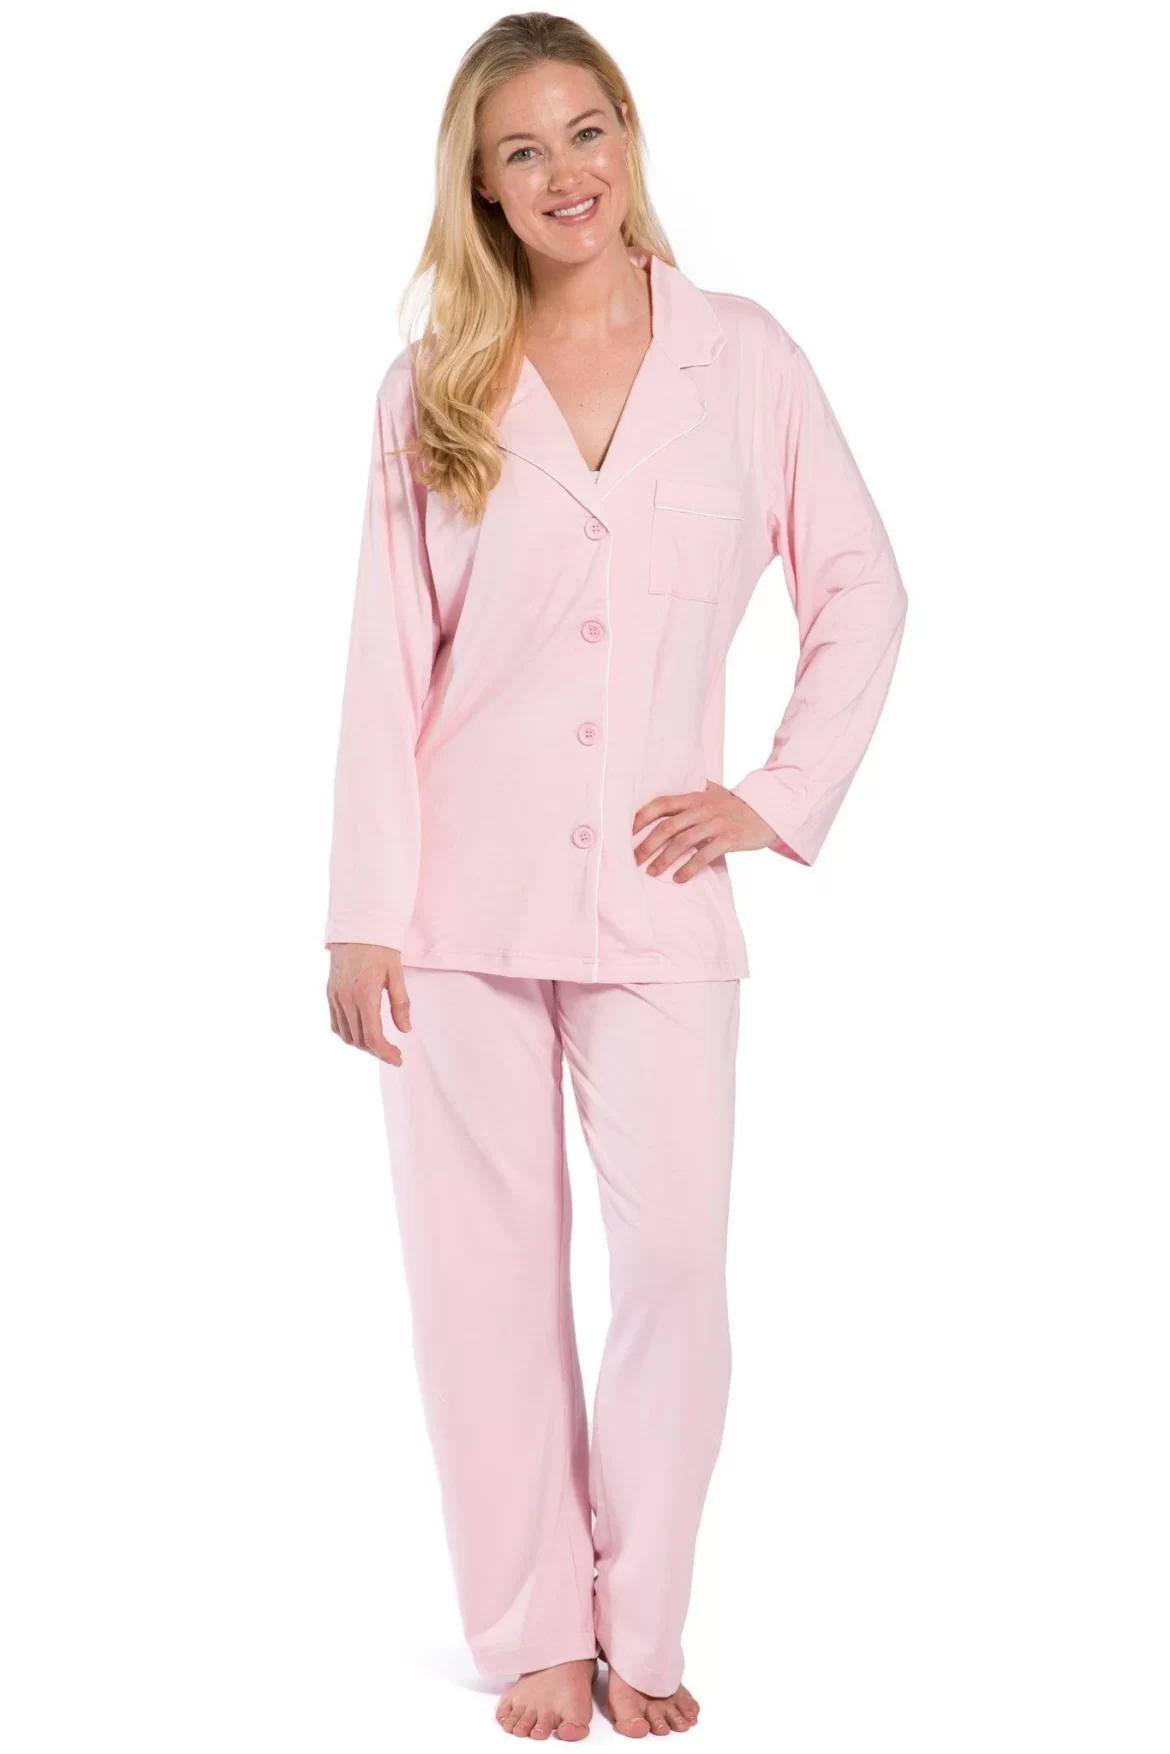 “Comfortably Chic: Styling Your Pajamas for Lazy Days at Home”